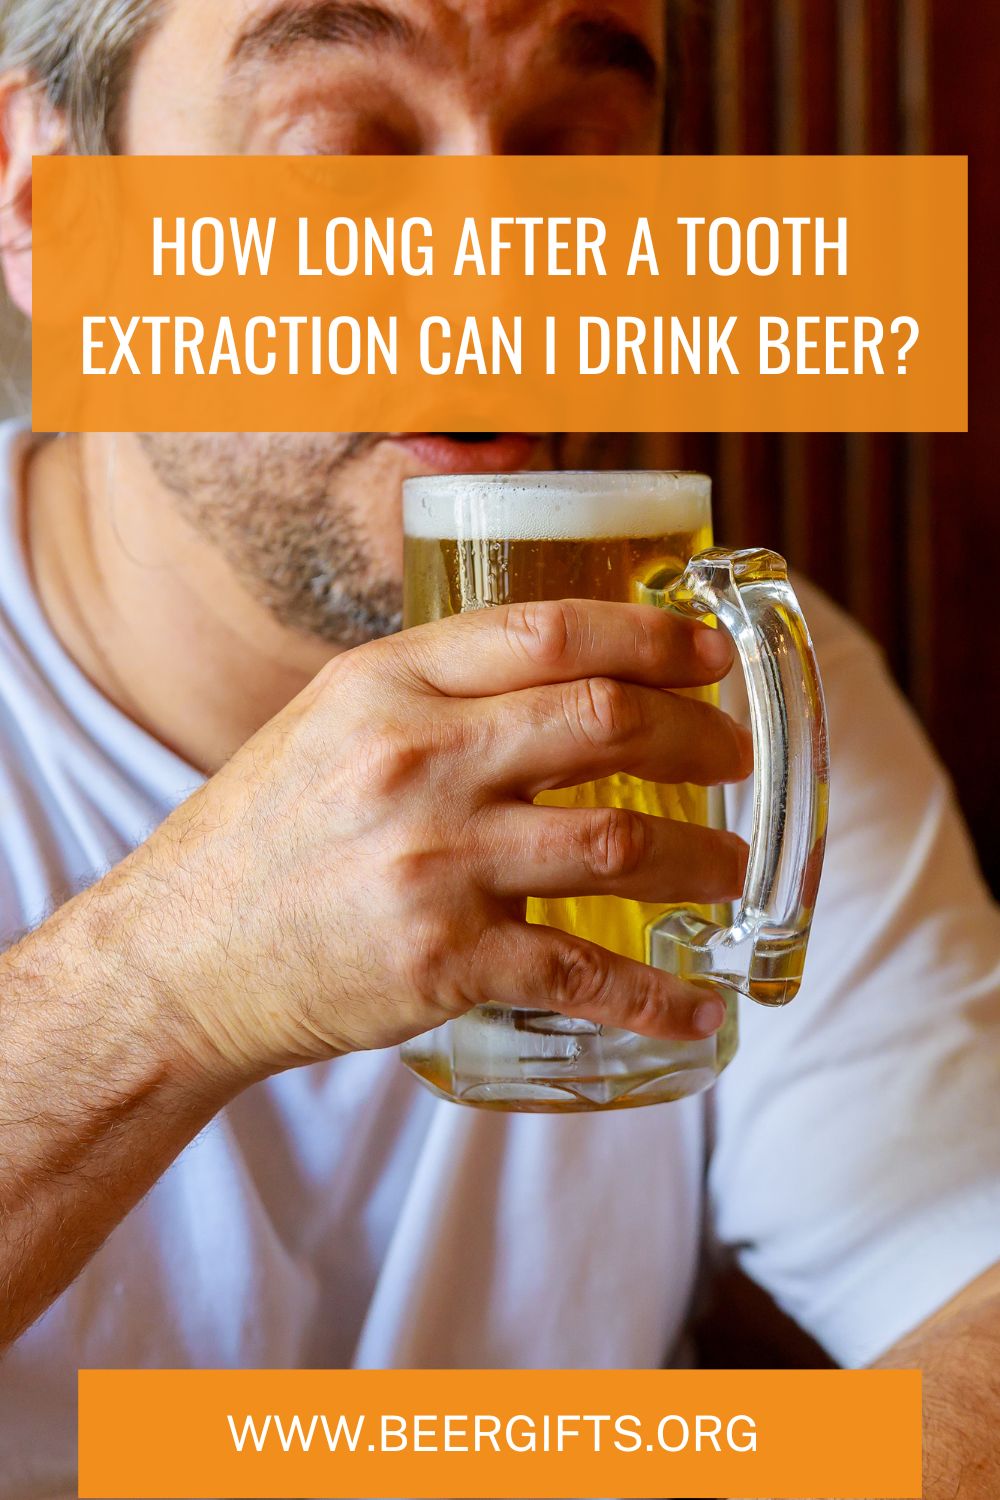 How Long After a Tooth Extraction Can I Drink Beer?1